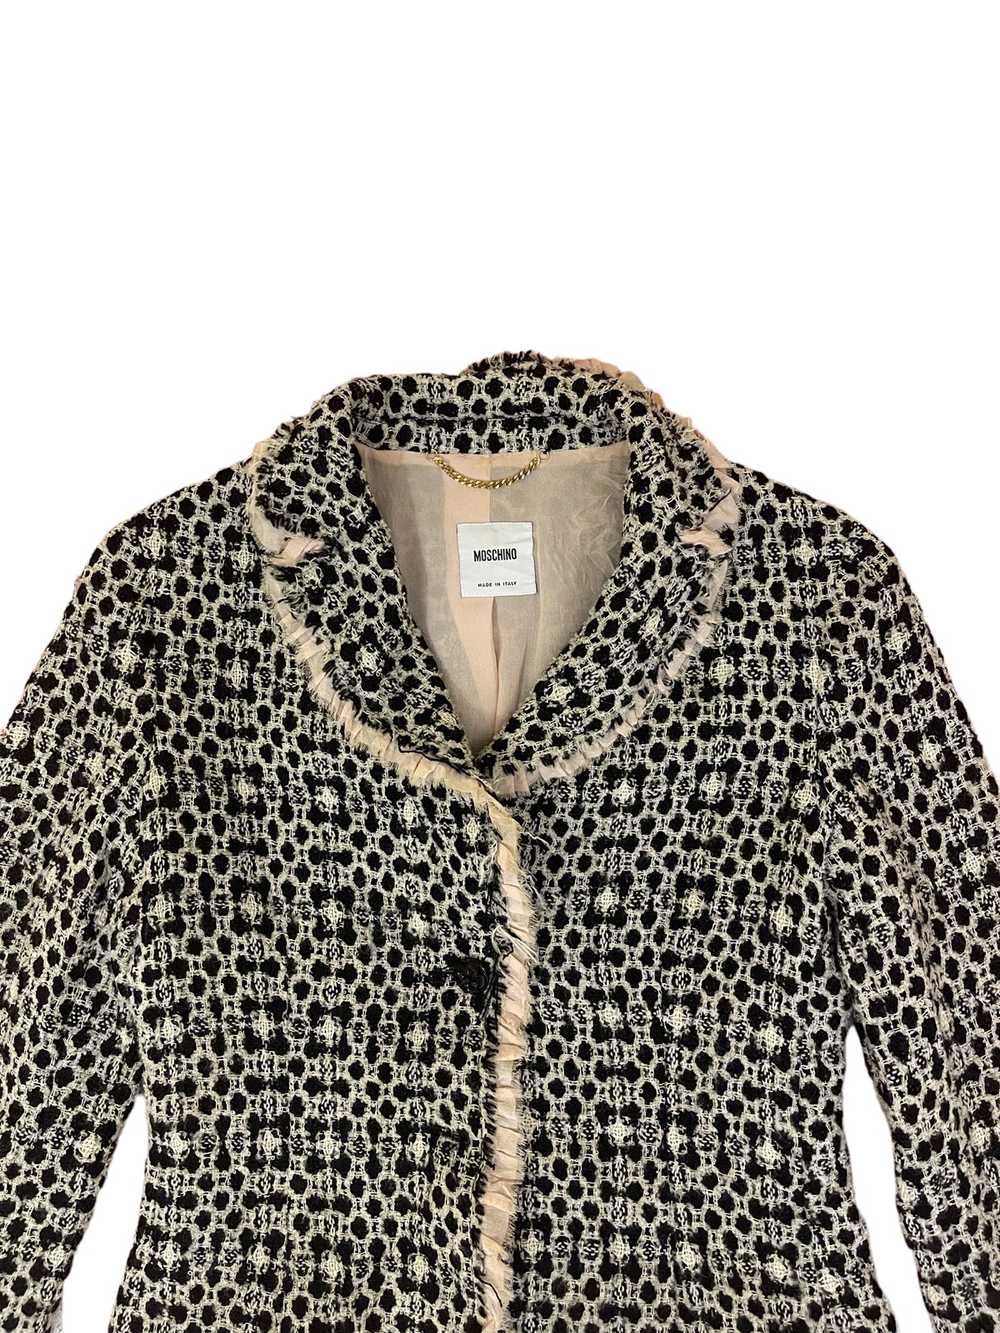 Moschino women jacket made in italy - image 6